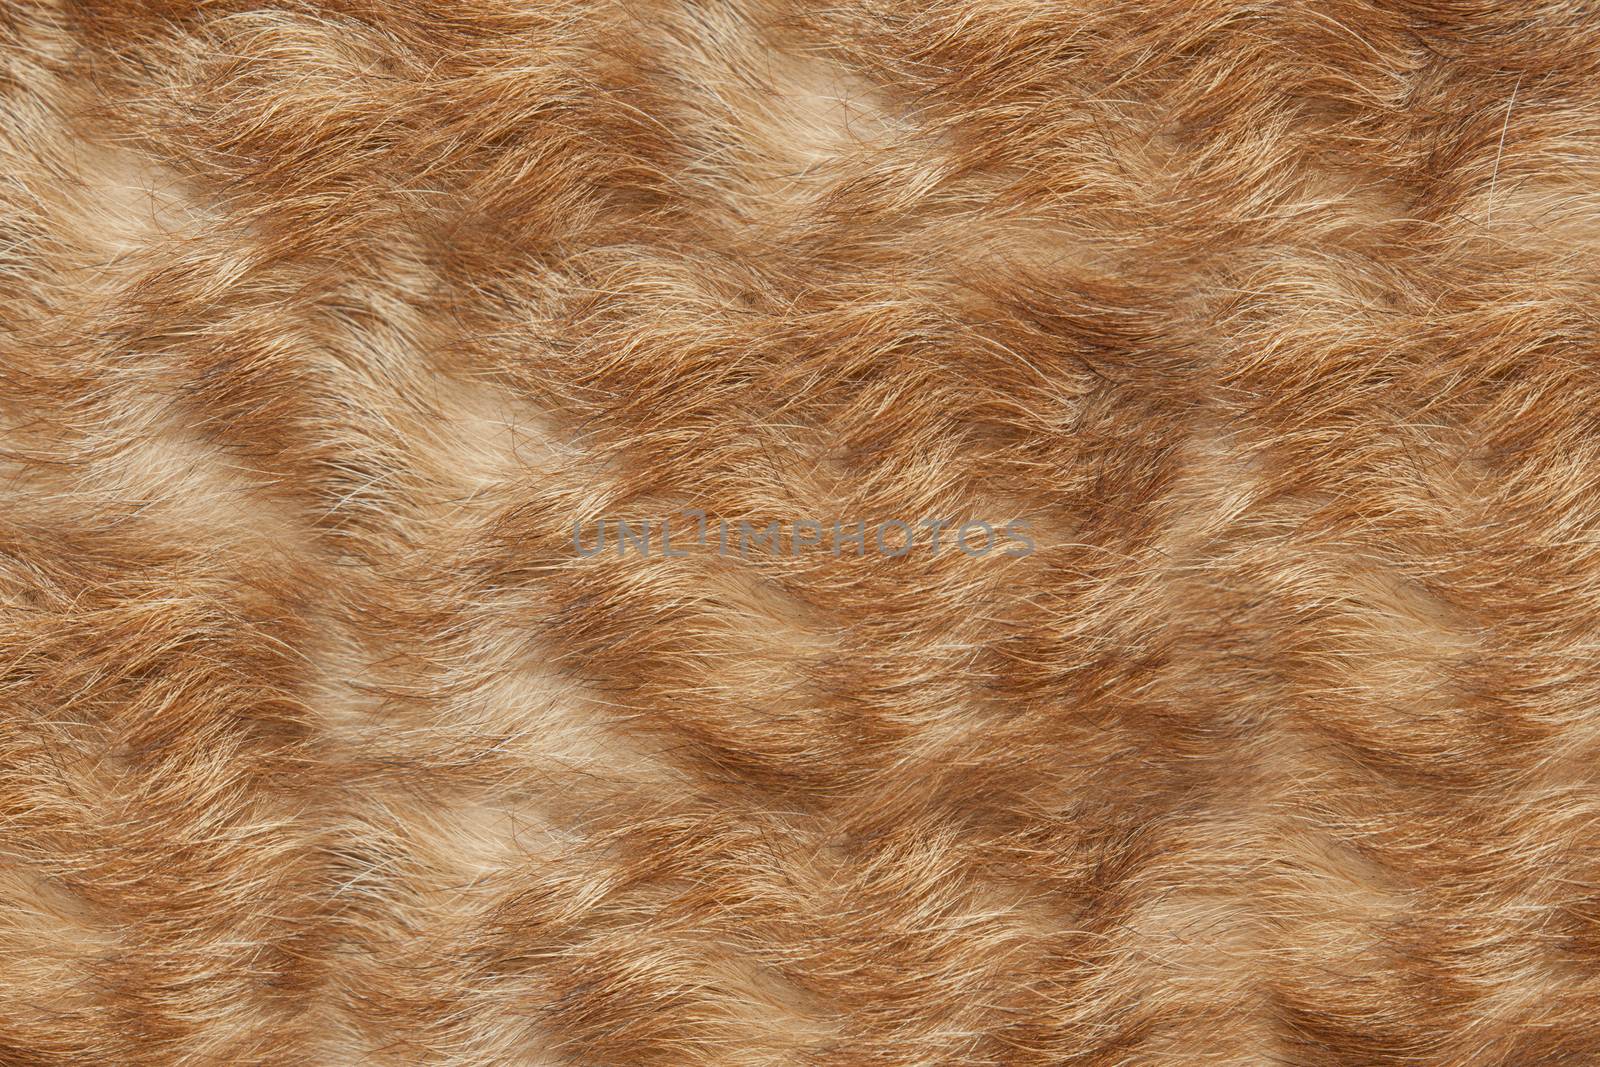 Texture wool red dog  by AleksandrN